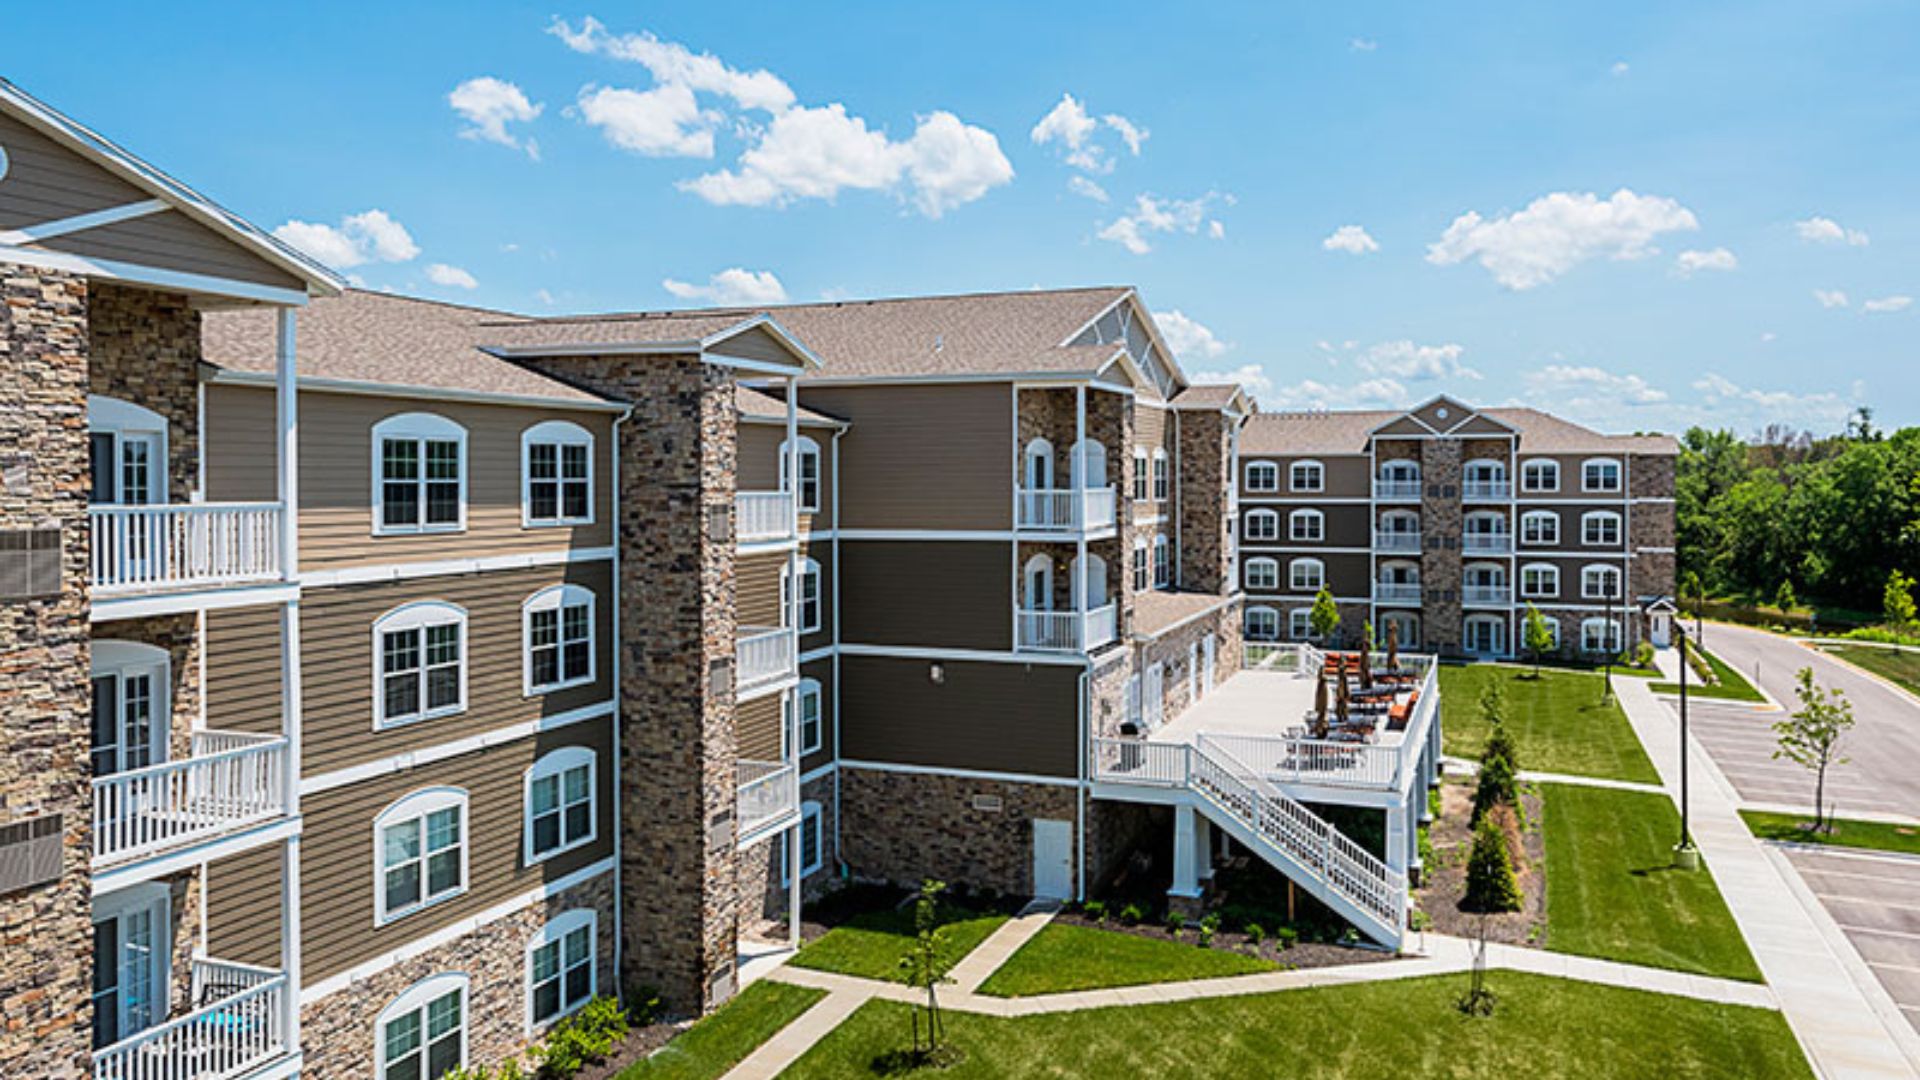 Benefits of Joining Our Senior Apartments in Olathe